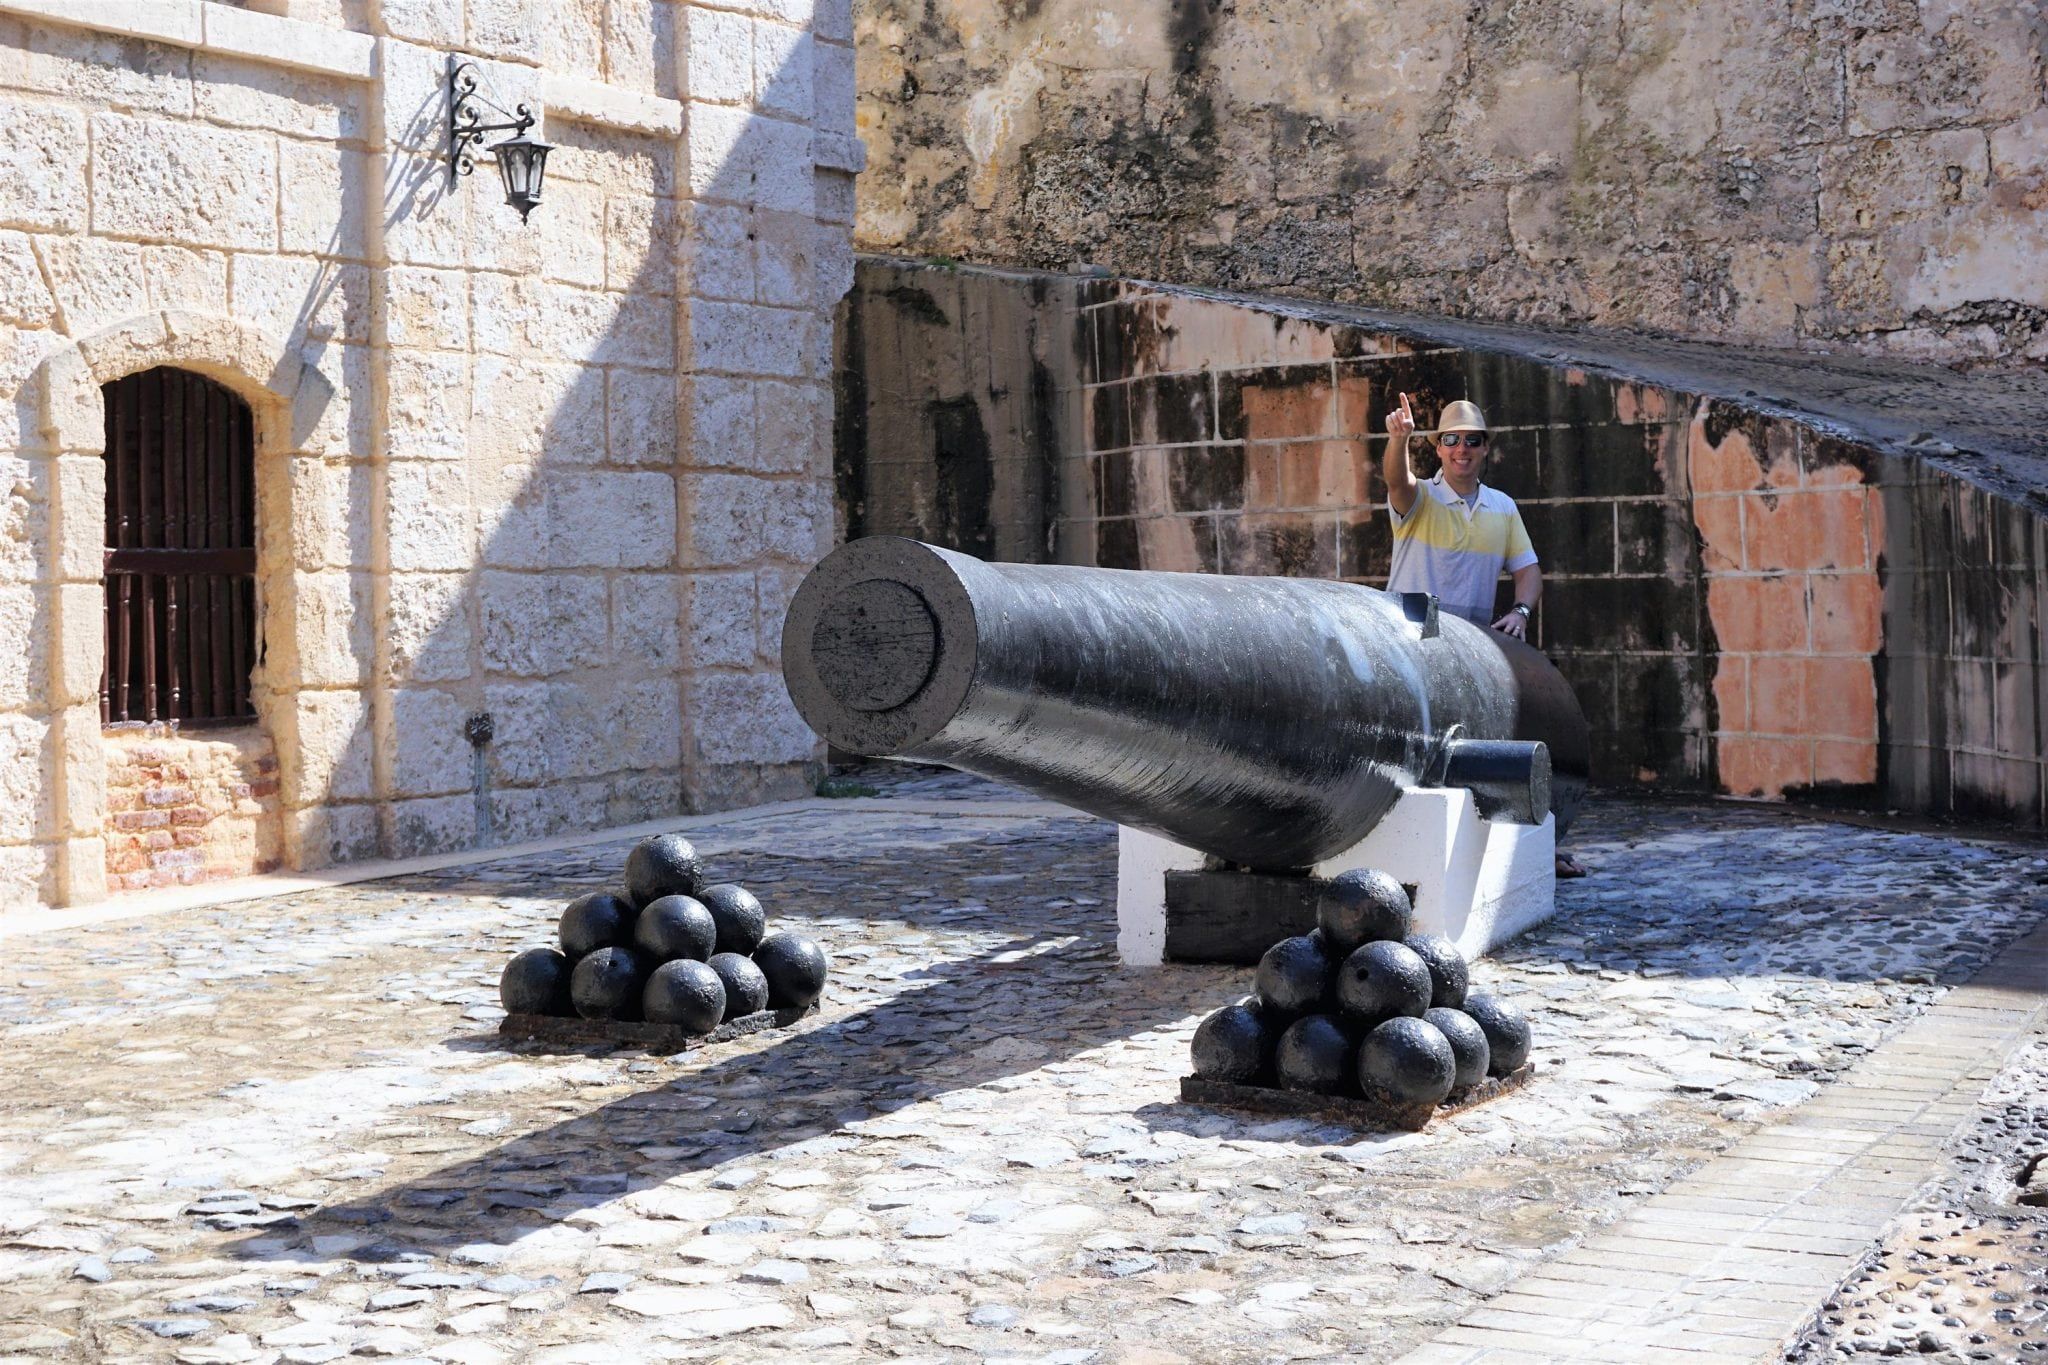 Touring the Historic Forts of Havana, Cuba